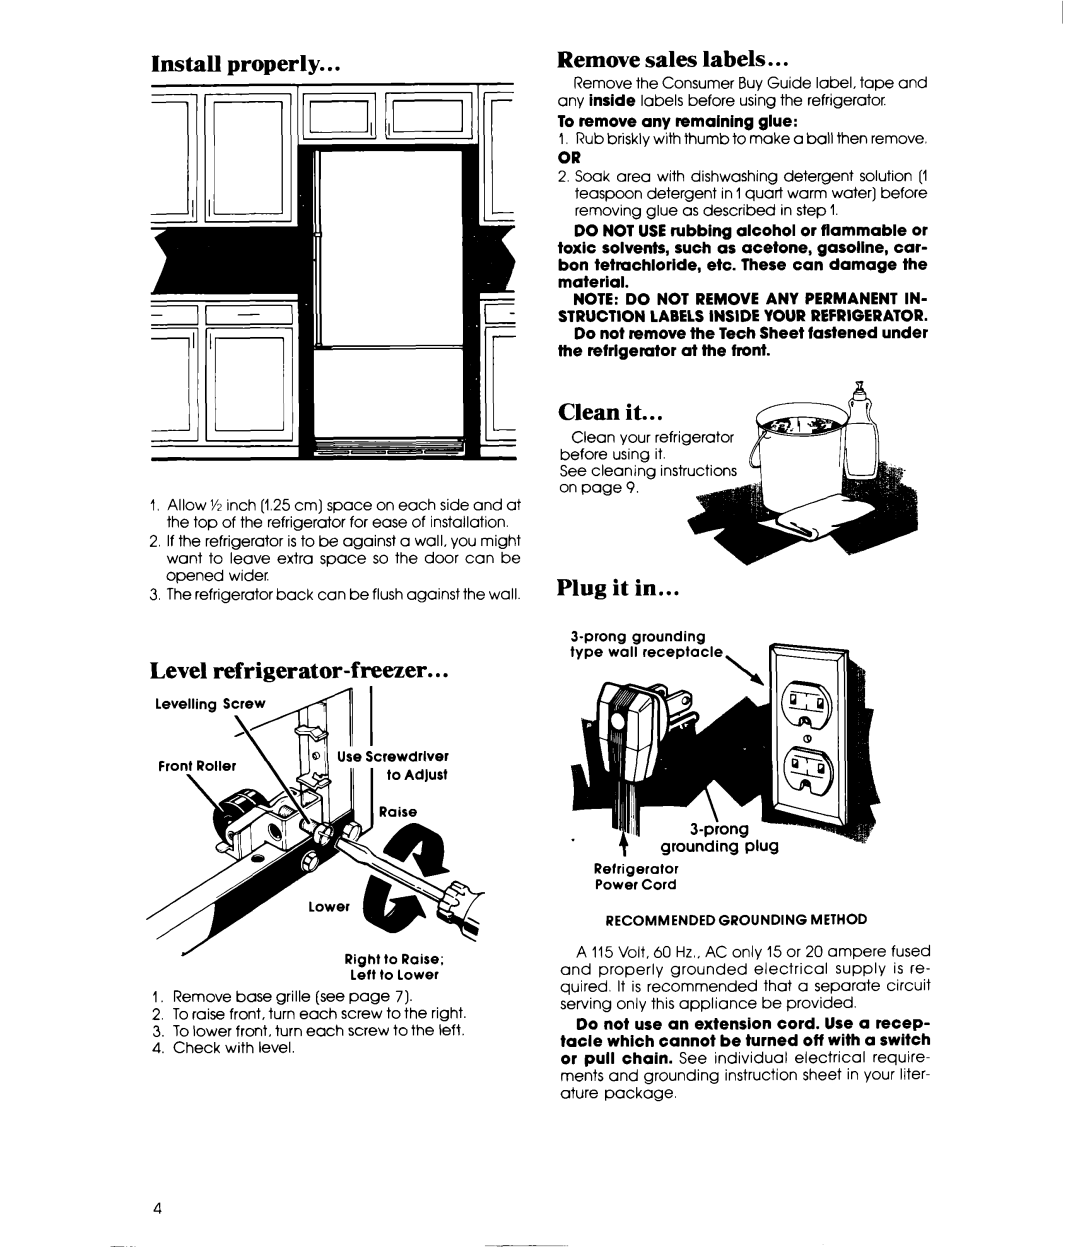 Whirlpool EB19ZK manual Install properly, Level refrigerator-freezer, Remove sales labels, Clean it, Plug it in 